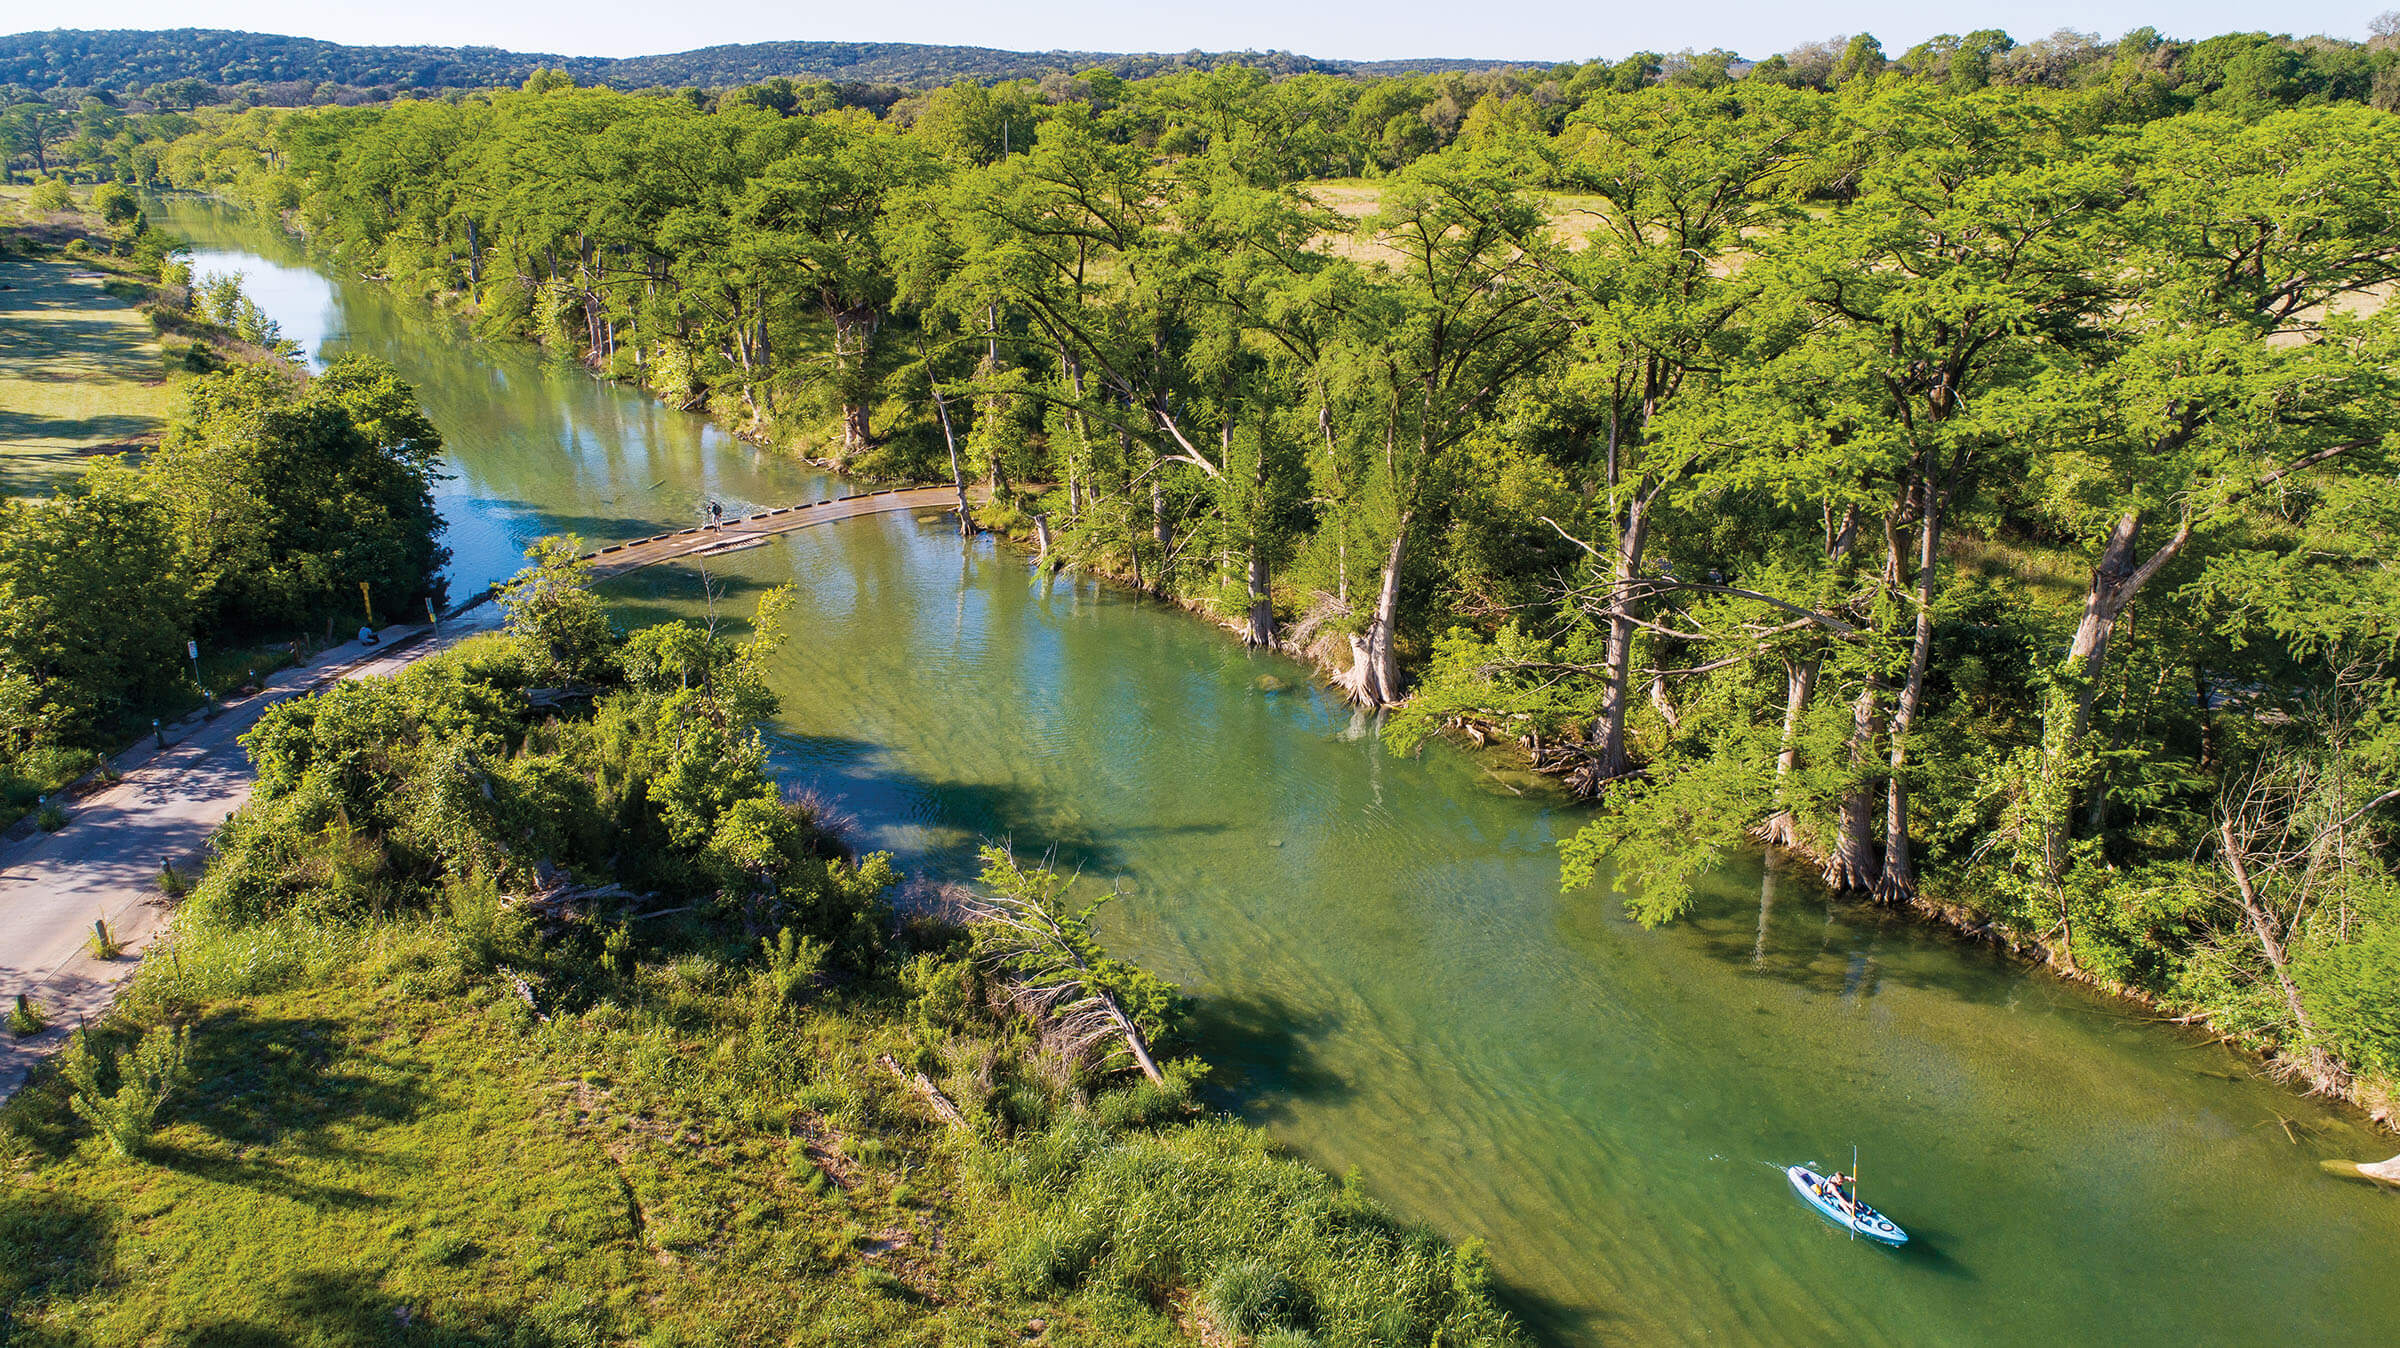 An overhead view of the wide blue Blanco river with boats in the middle and trees on the side